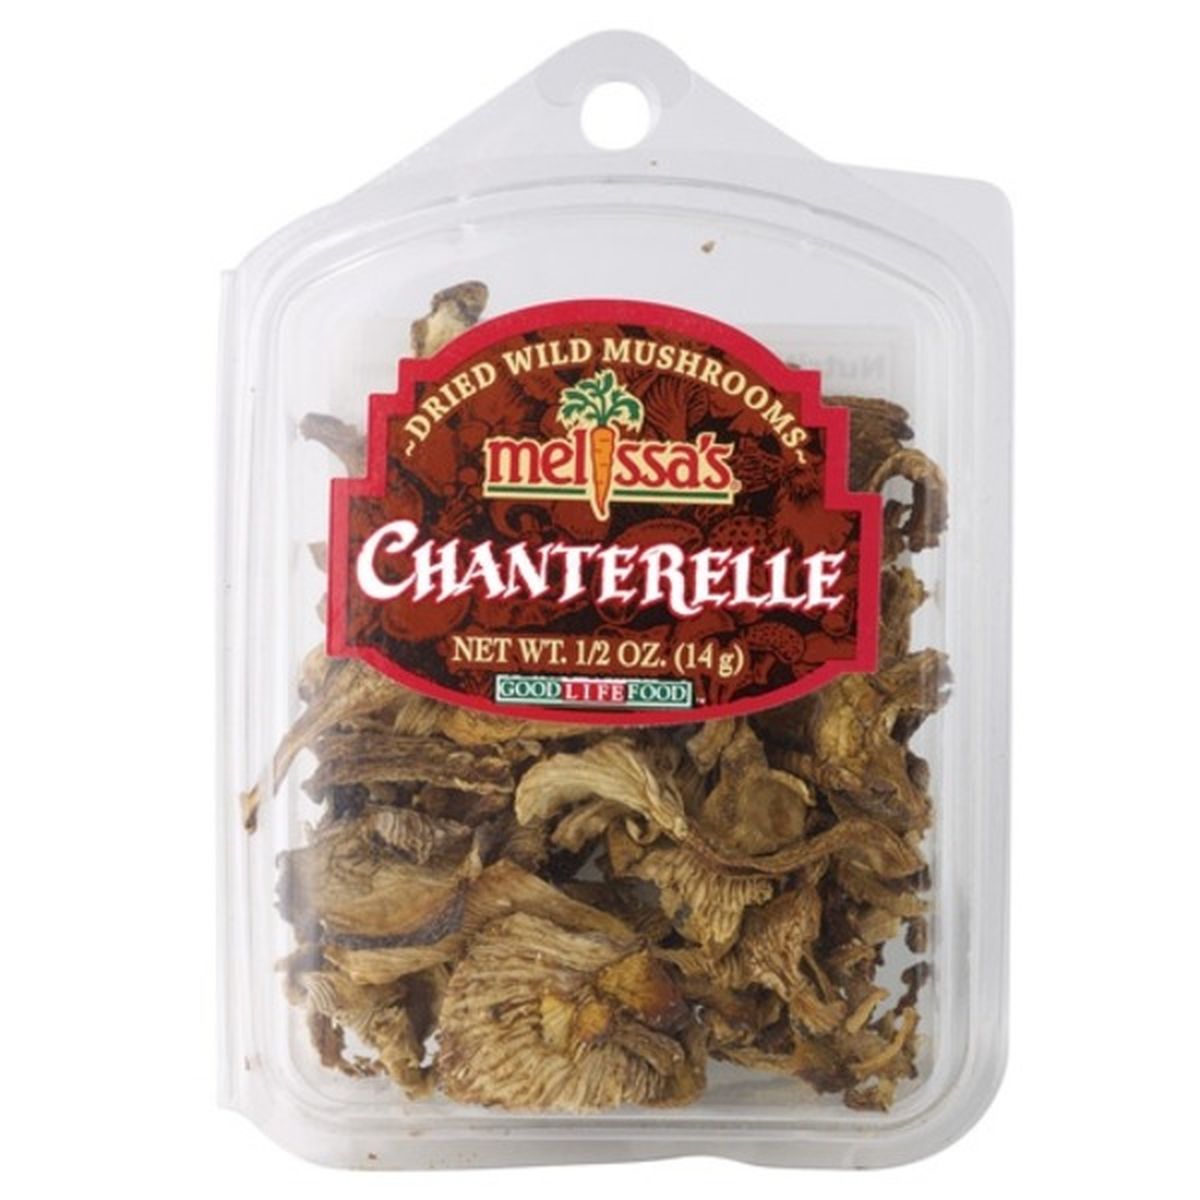 Calories in Philips Chanterelle Dried Wild Mushrooms